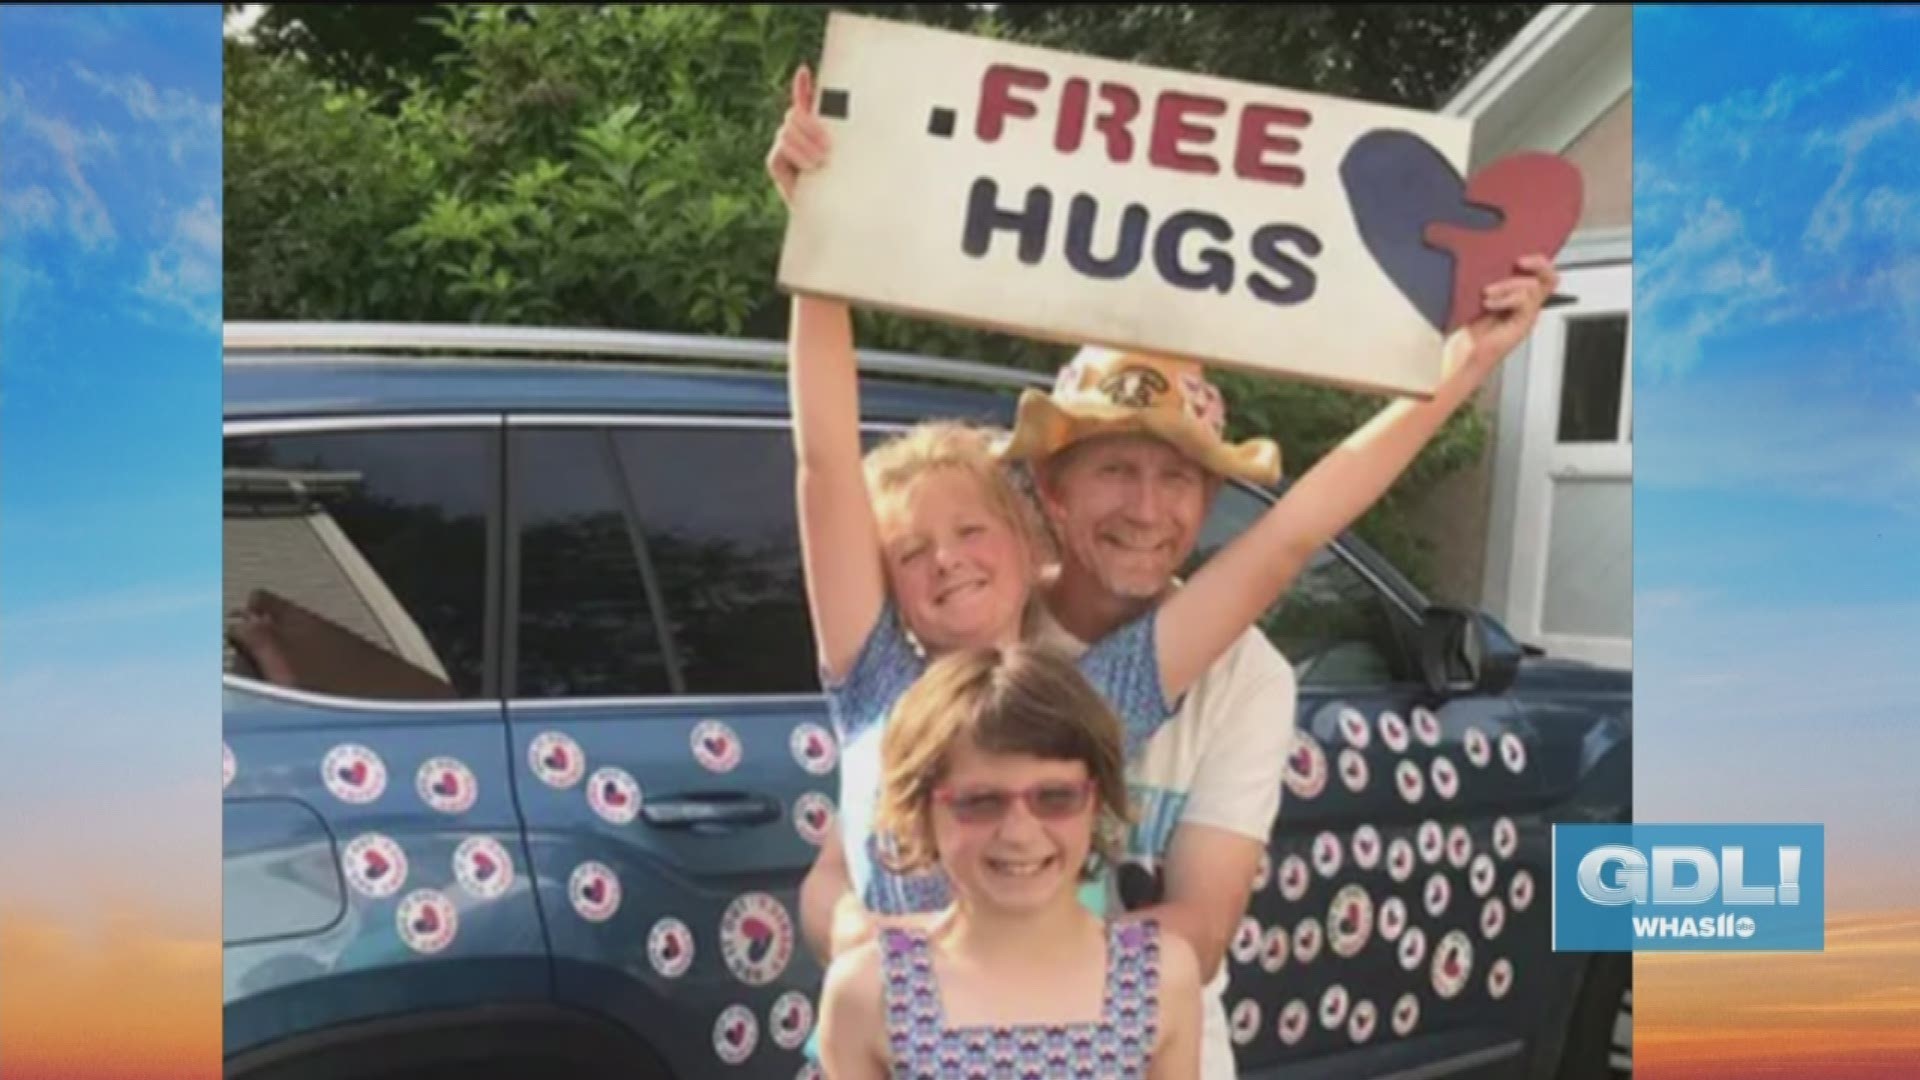 Billy Park is traveling the country with his wife and two daughters spreading the message of love and combating hate by offering free hugs. You can see more about their mission at HugOutHate.org.